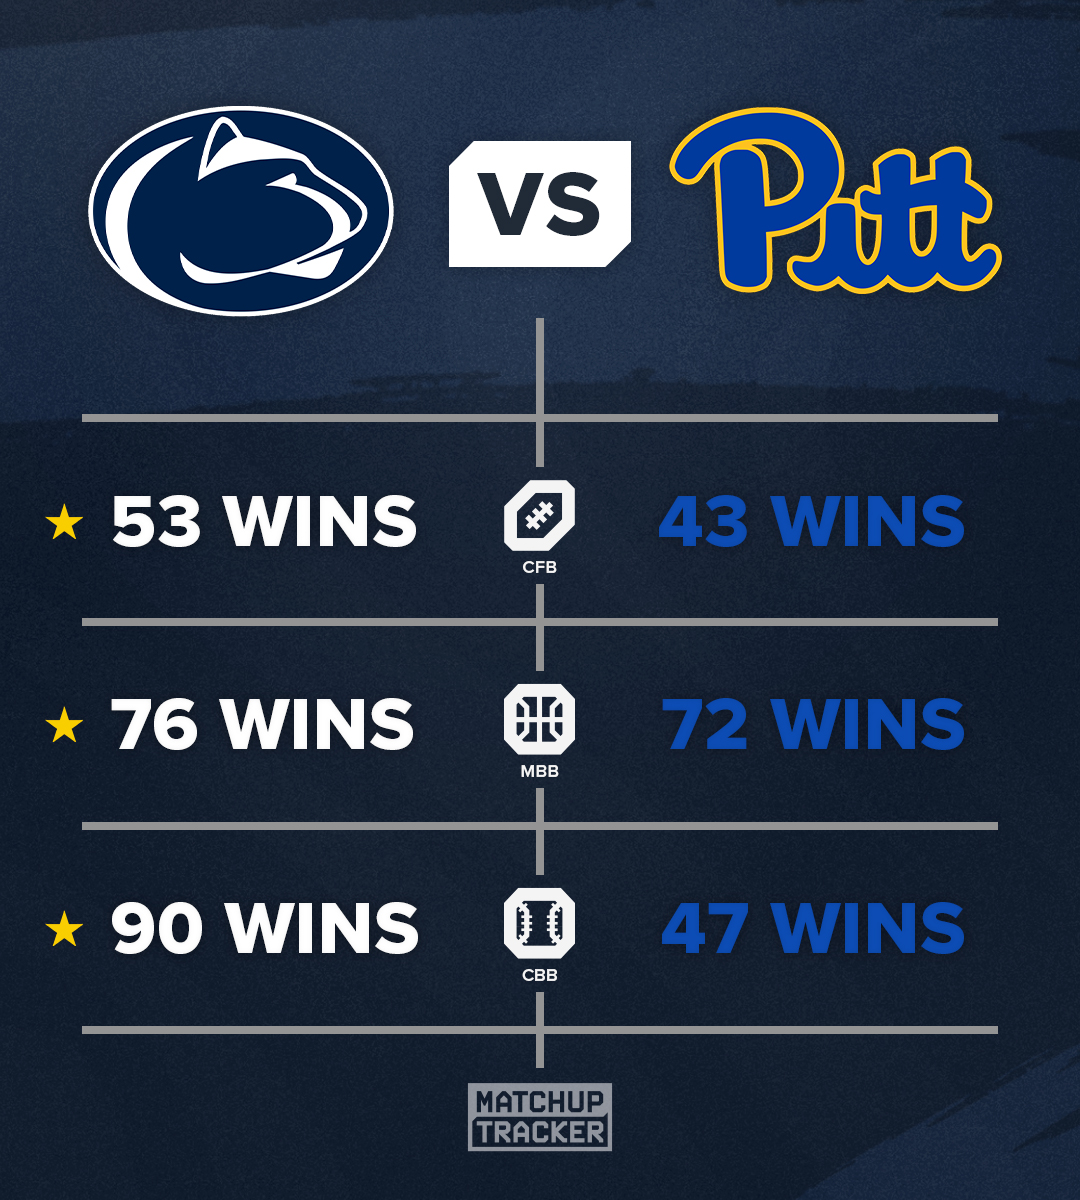 Penn State vs. Pitt Rivalry Head-to-Head Wins in Football, Basketball, & Baseball 🏟️ Which two teams should I compare next?